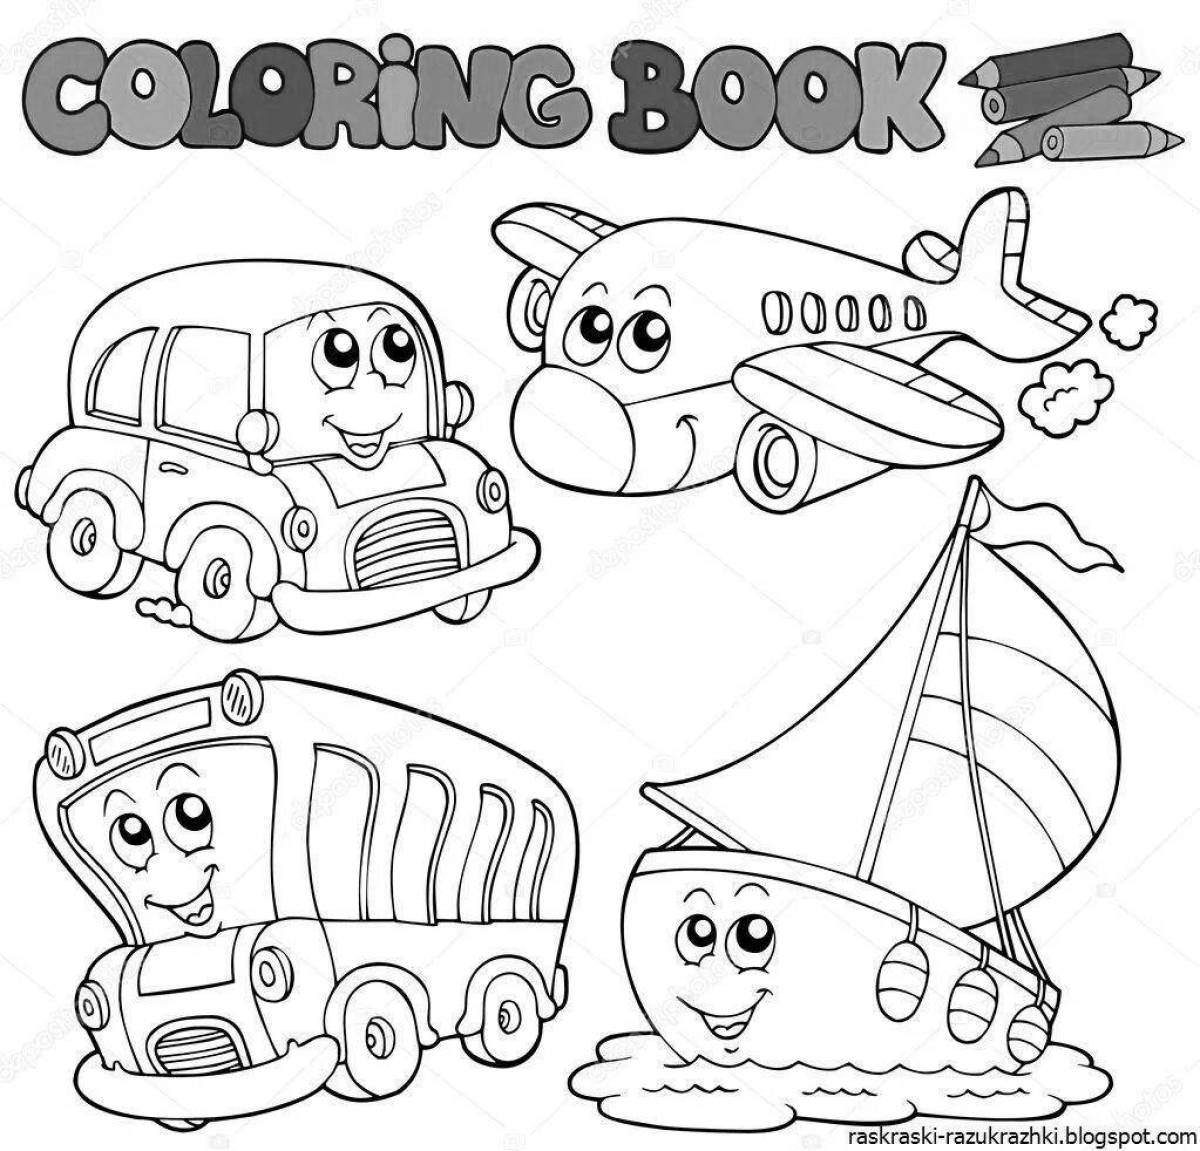 Exquisite transport coloring book for kids